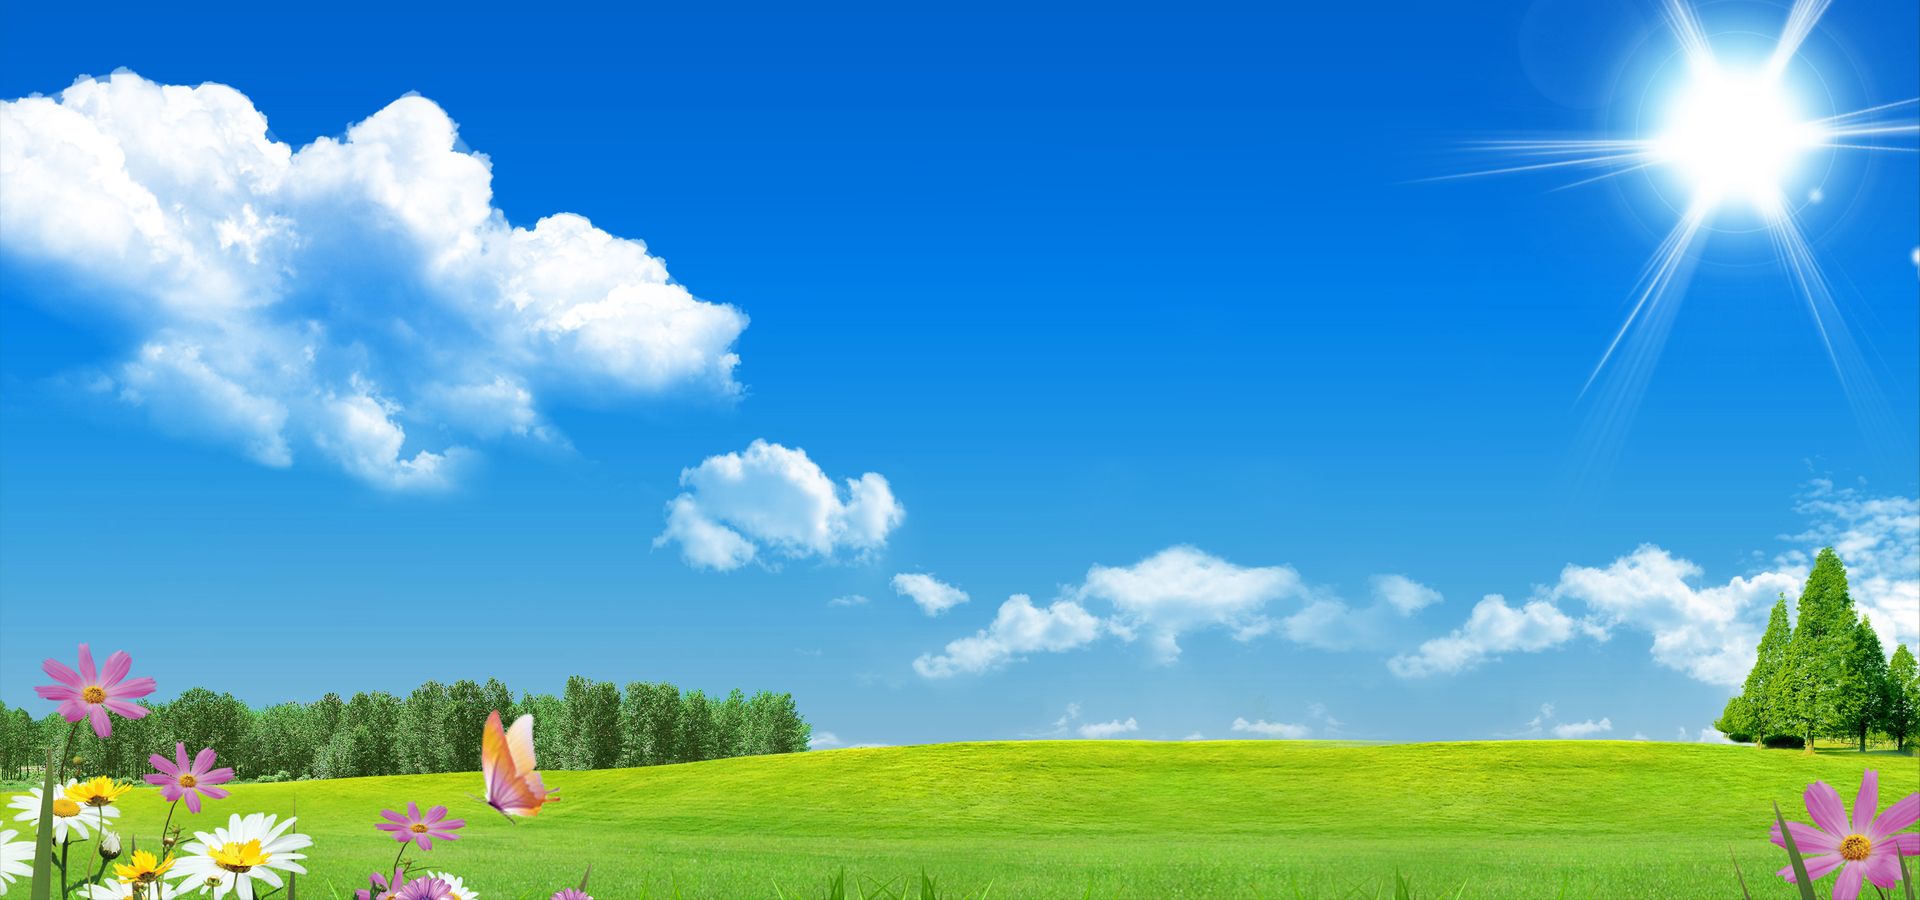 Blue Sky And Green Grass. Green grass background, Sky landscape, Beautiful landscape paintings